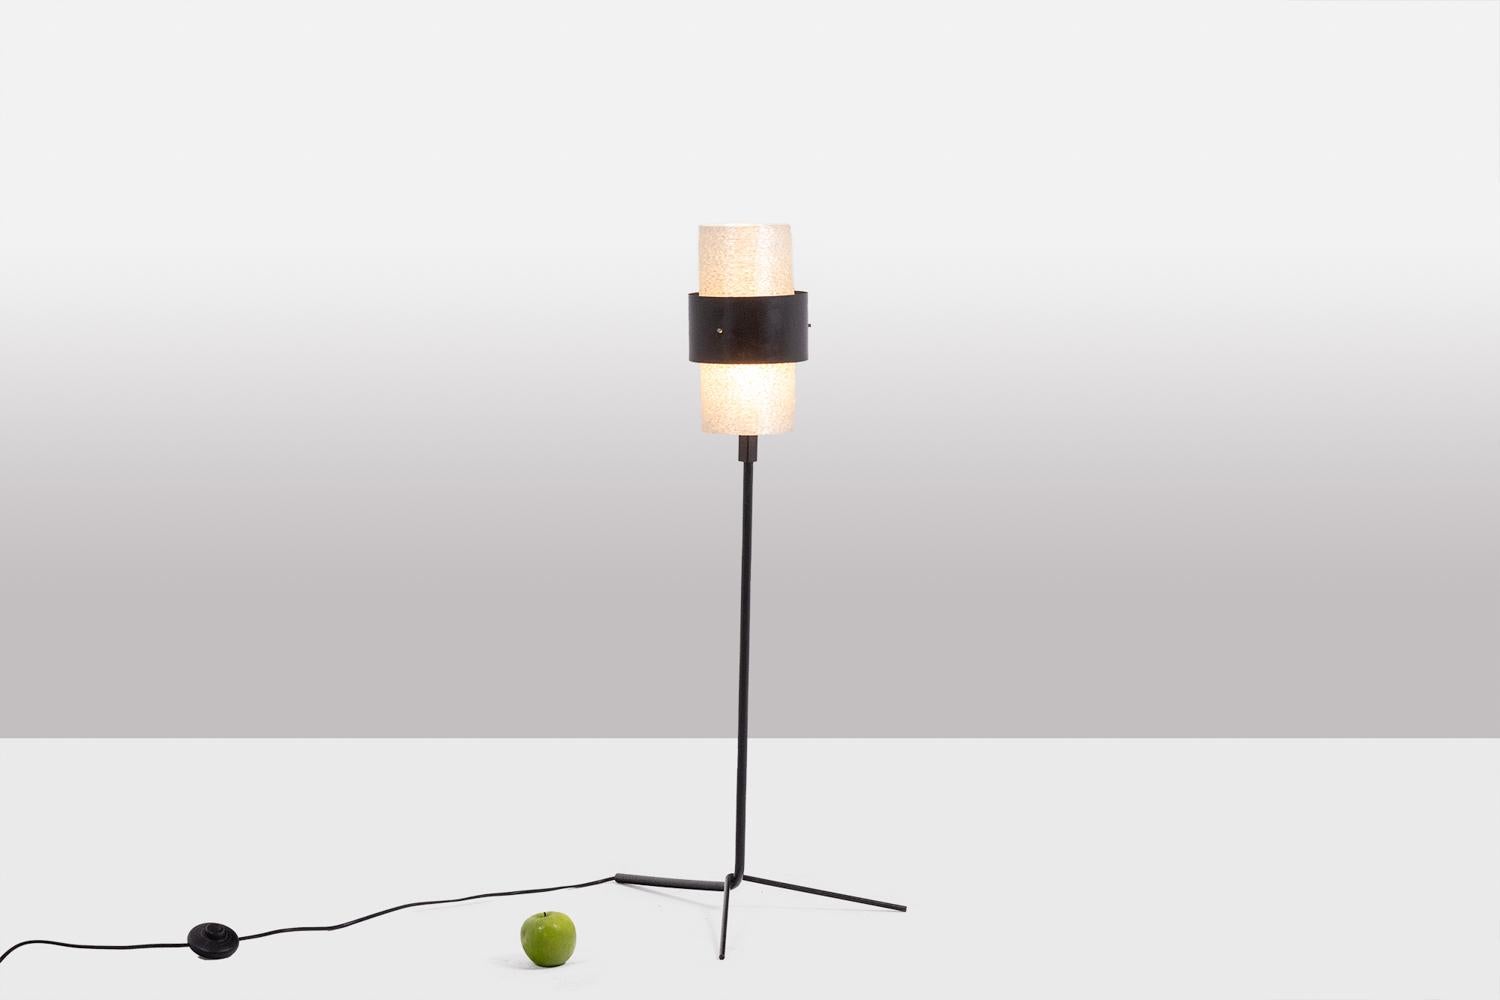 Lamp consisting of a cylindrical granite lucite lampshade surrounded by a black lacquered metal circle resting on a tripod-shaped black lacquered metal tube.

French work realized in the 1950s.

New and functional electricity. Works with one E-14